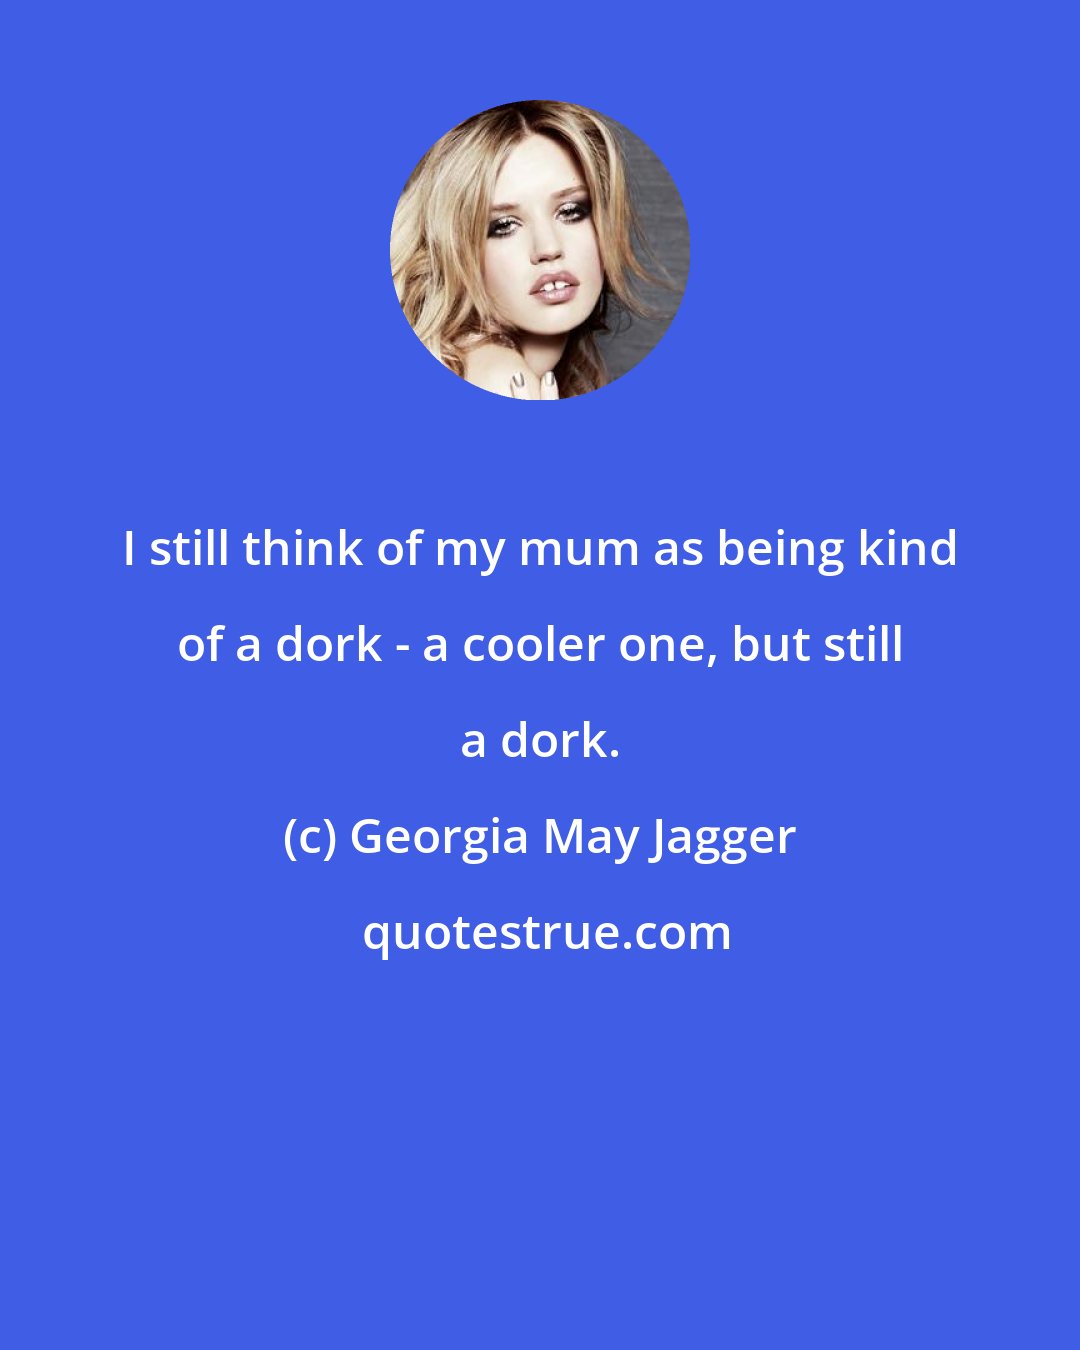 Georgia May Jagger: I still think of my mum as being kind of a dork - a cooler one, but still a dork.